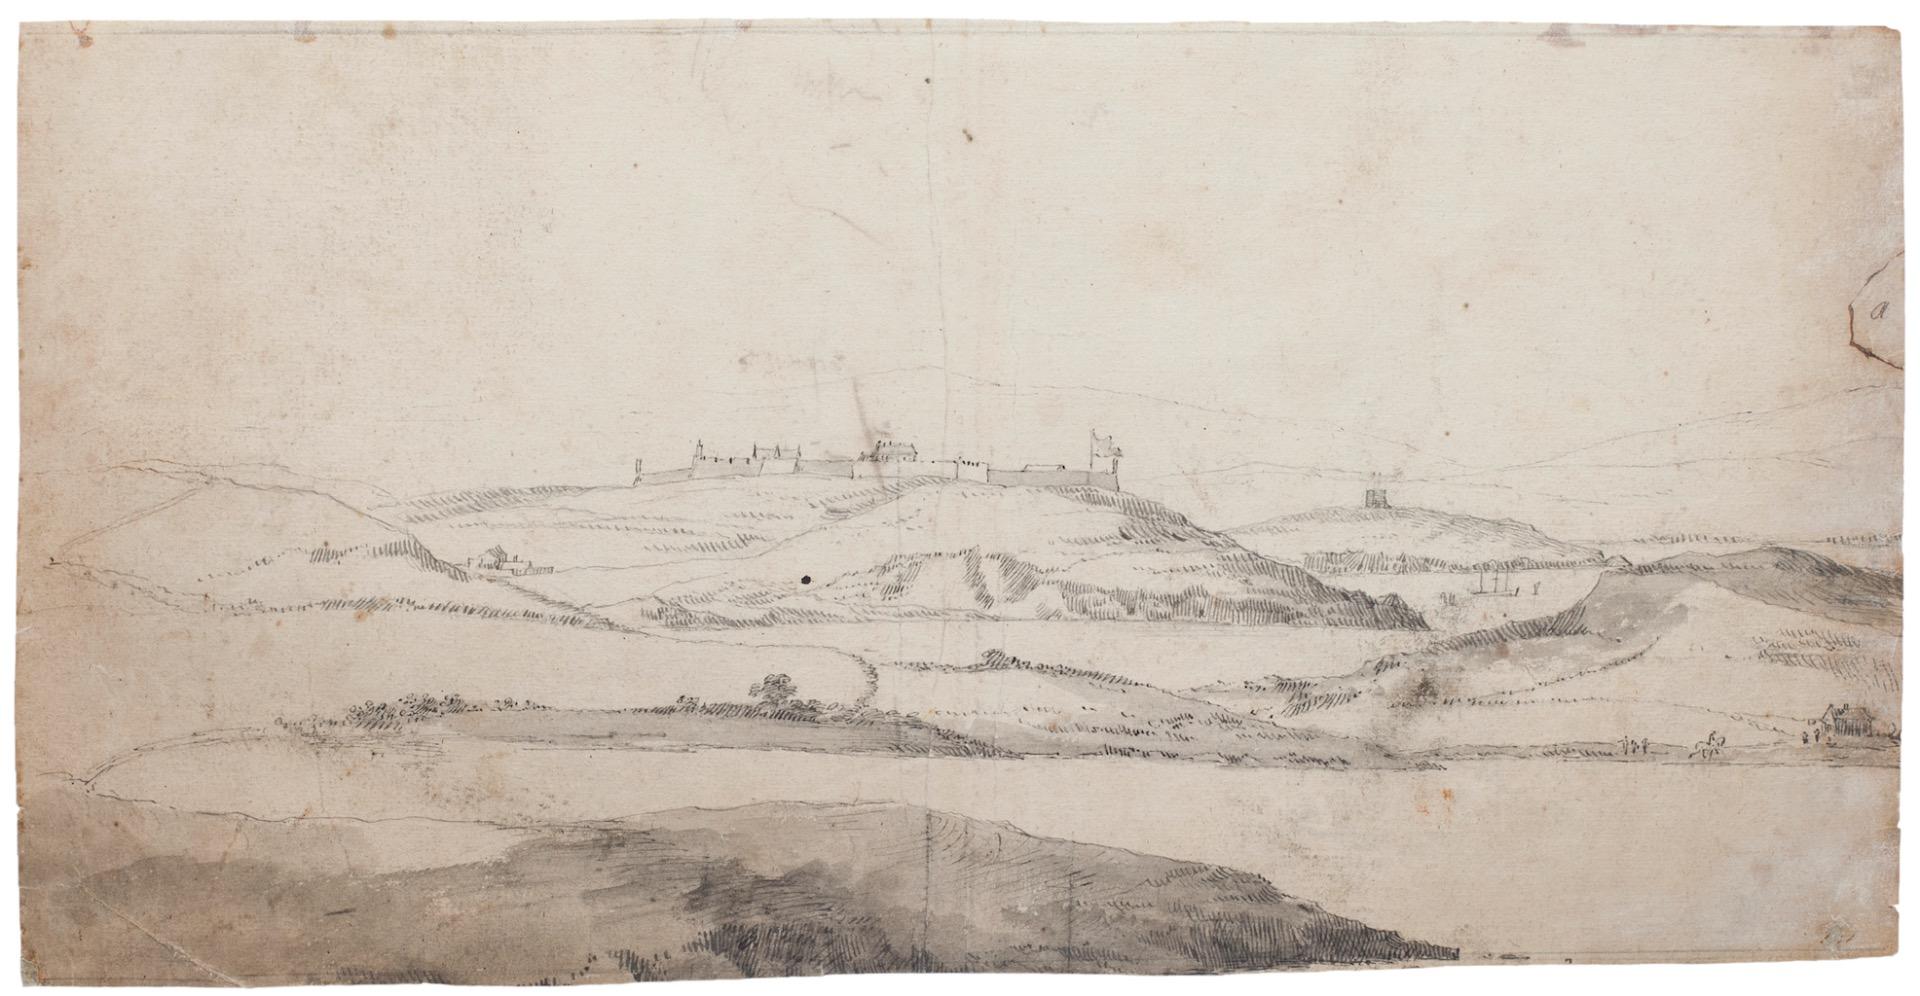 Landscape is an original drawing in ink and watercolor artwork realized by Jan Peeter Verdussen.

Good conditions except some minor stains and folds.

Jan Peeter Verdussen (1700-1767) Flemish painter draftsman and printmaker, best known for his